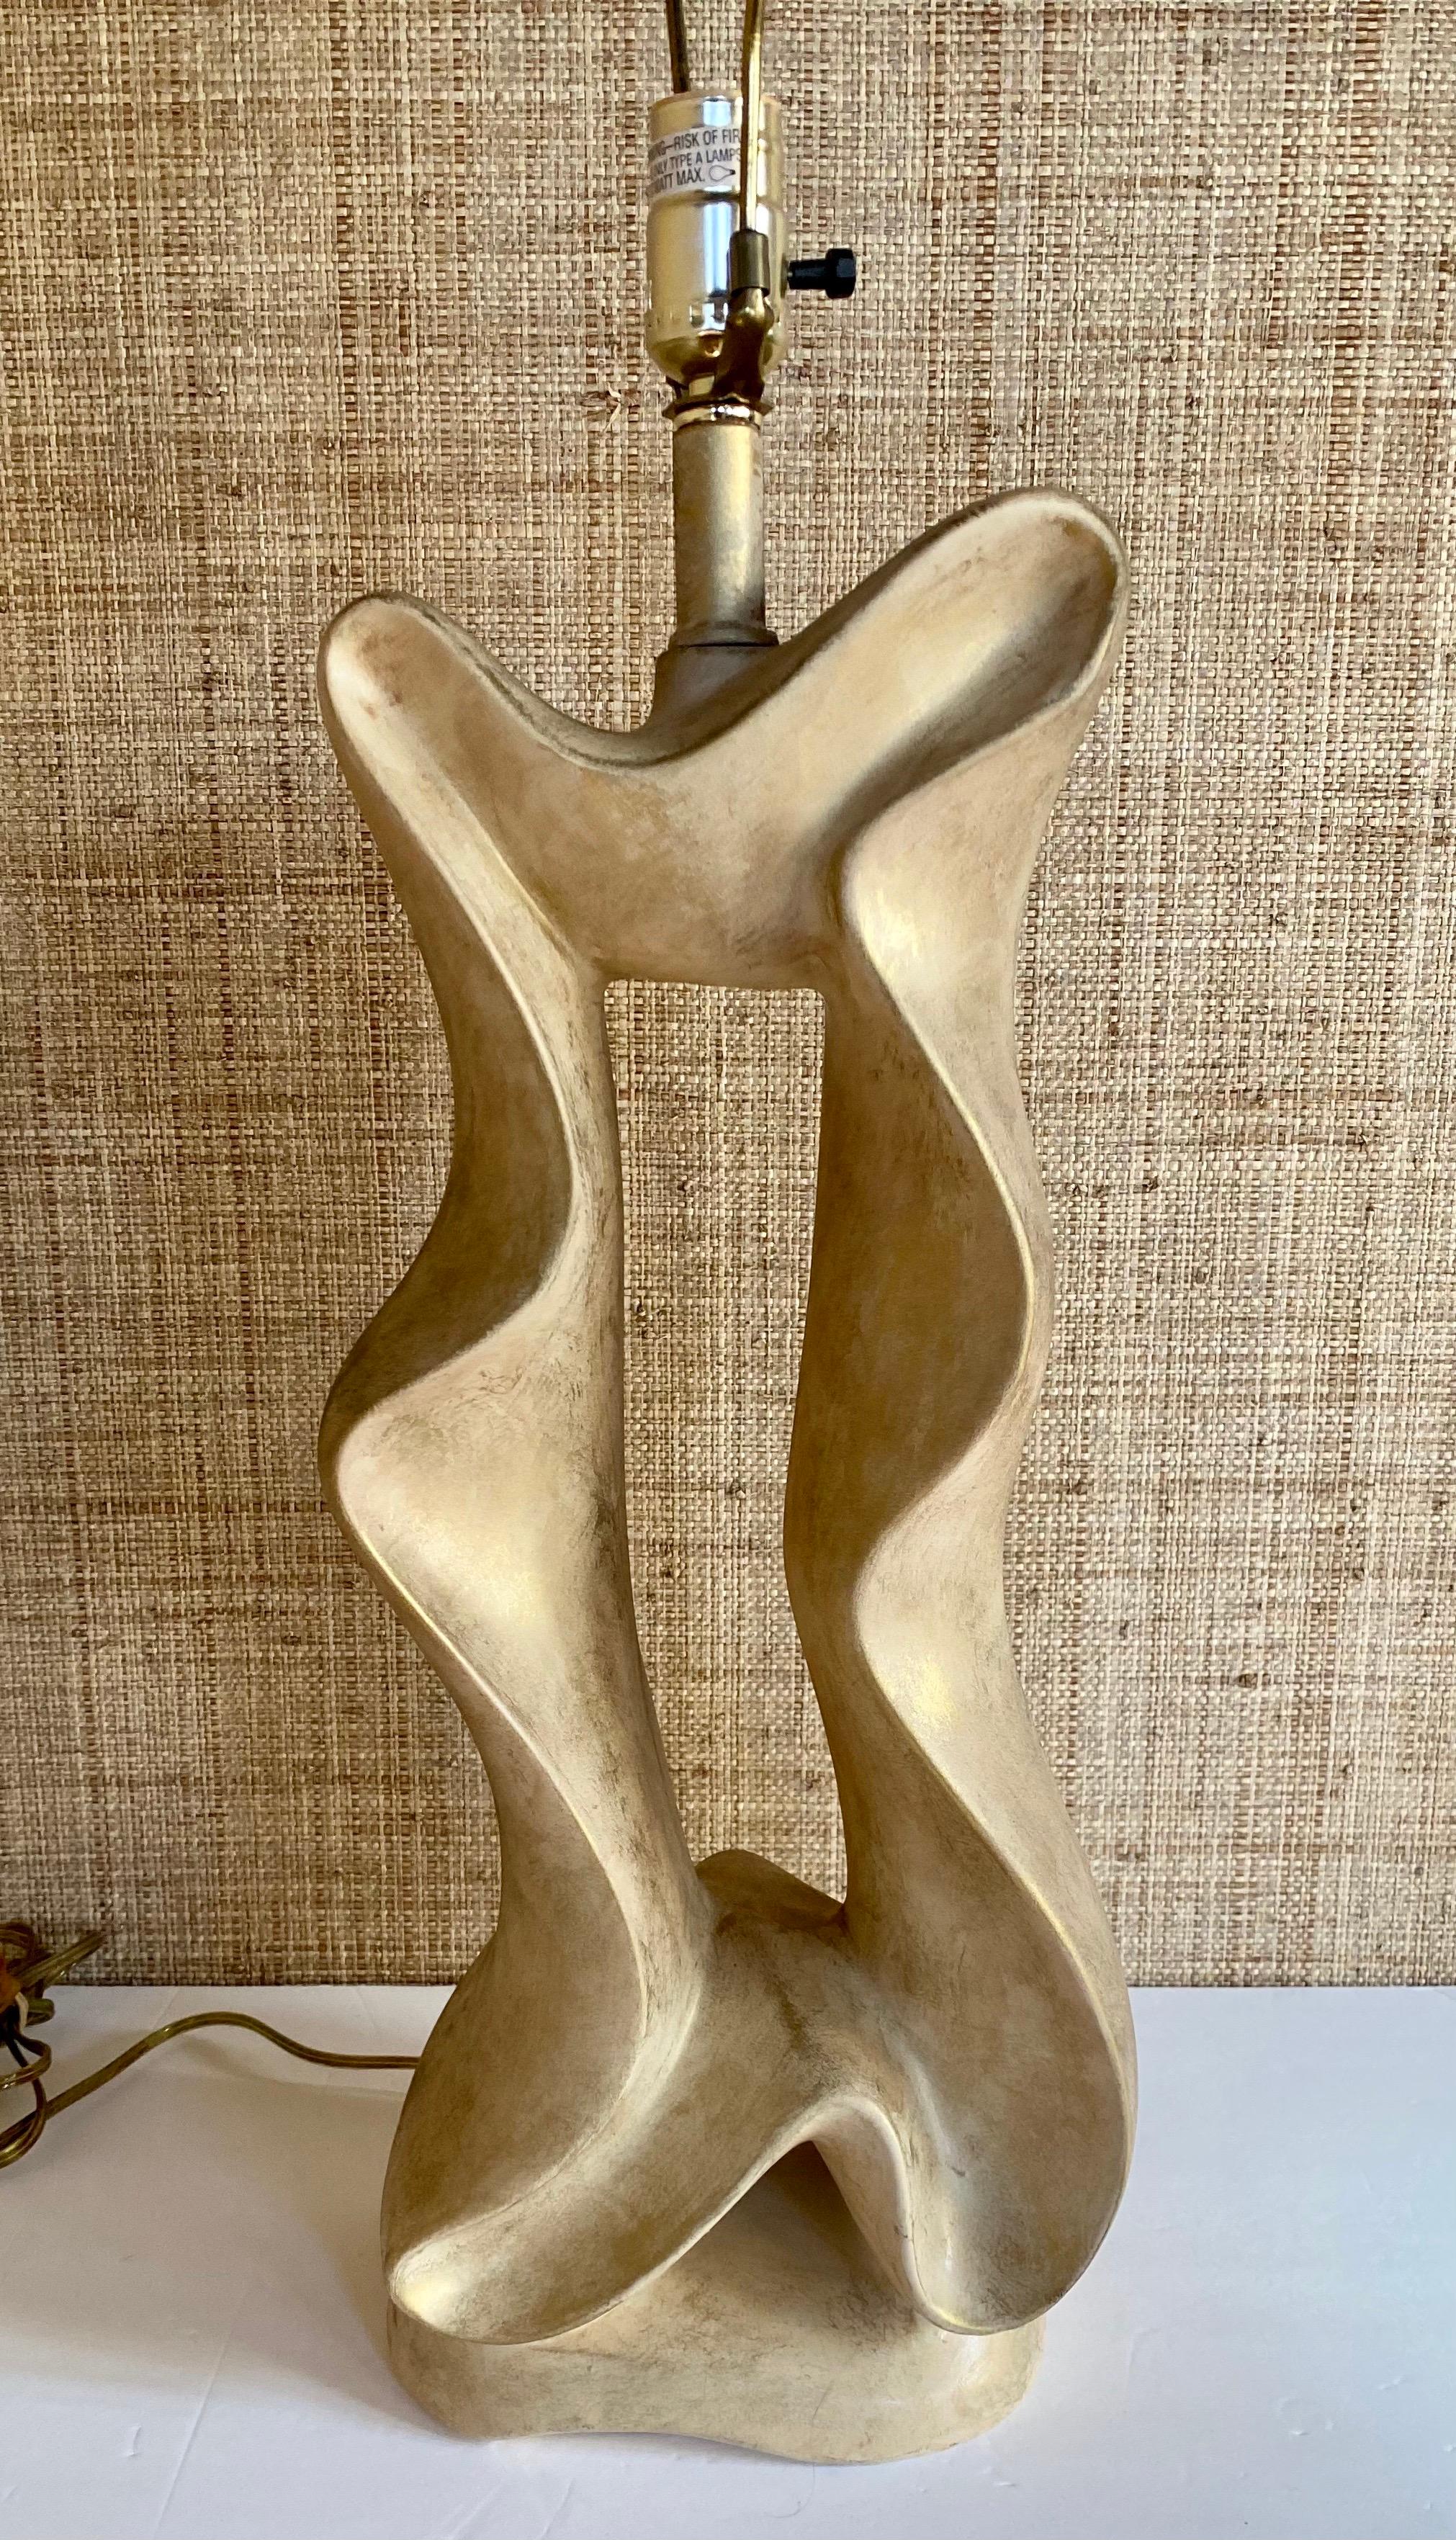 Very unique Post Modern biomorphic table lamp by Jaru. This sculptural abstract form lamp features a neutral tone finish with metallic gold accents. Circa 1980's. Lamp shade not included. 

Measures: Height to finial: 31 inches. 
Height to